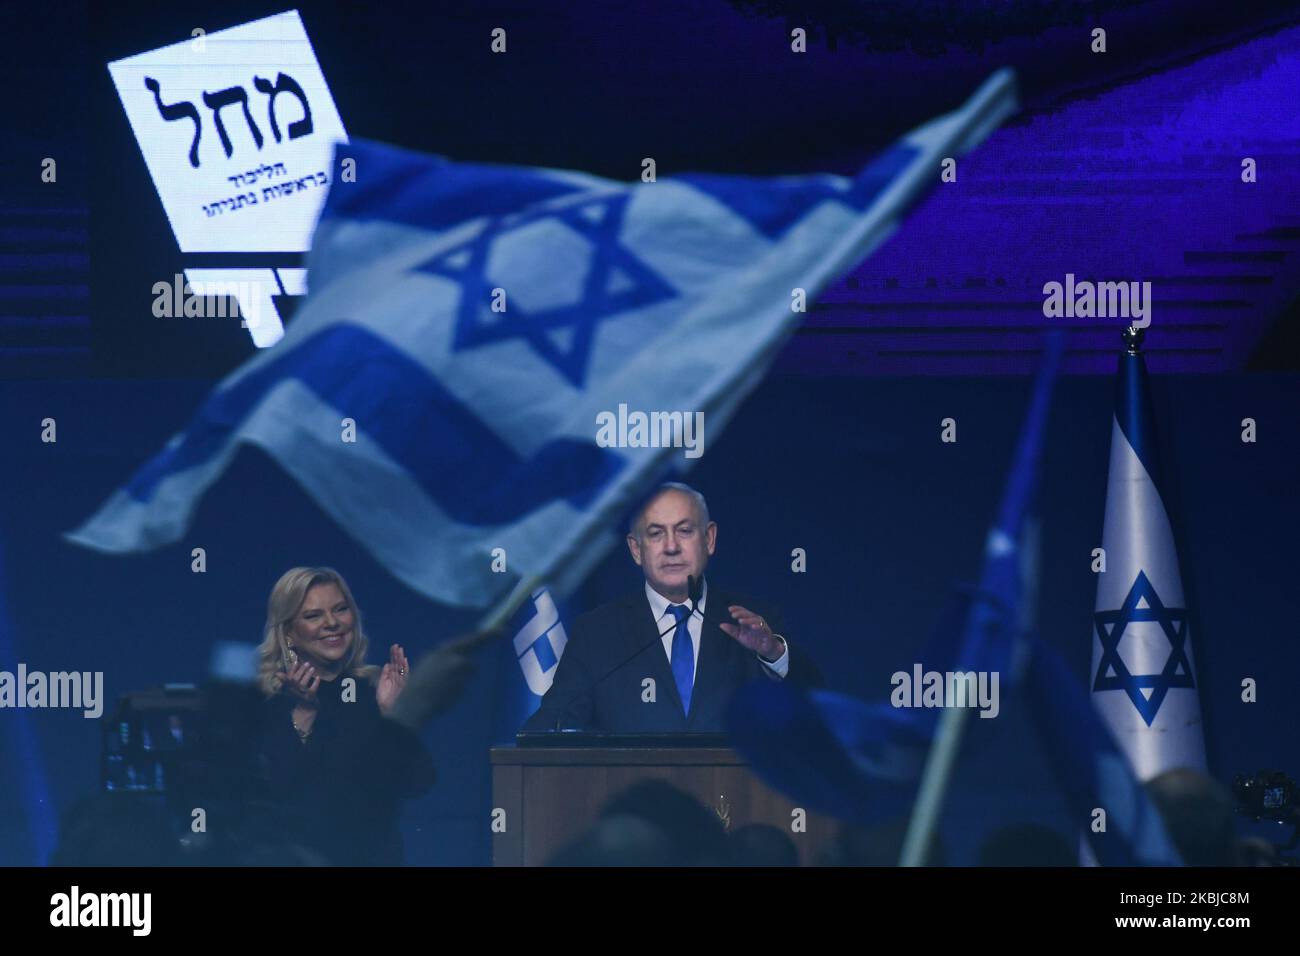 Israeli Prime Minister Benjamin Netanyahu stands next to his wife Sara as he speaks to supporters following the announcement of exit polls in Israel's election at his Likud party headquarters in Tel Aviv. On Tuesday, March 3, 2020, in Tel Aviv, Israel. (Photo by Artur Widak/NurPhoto) Stock Photo